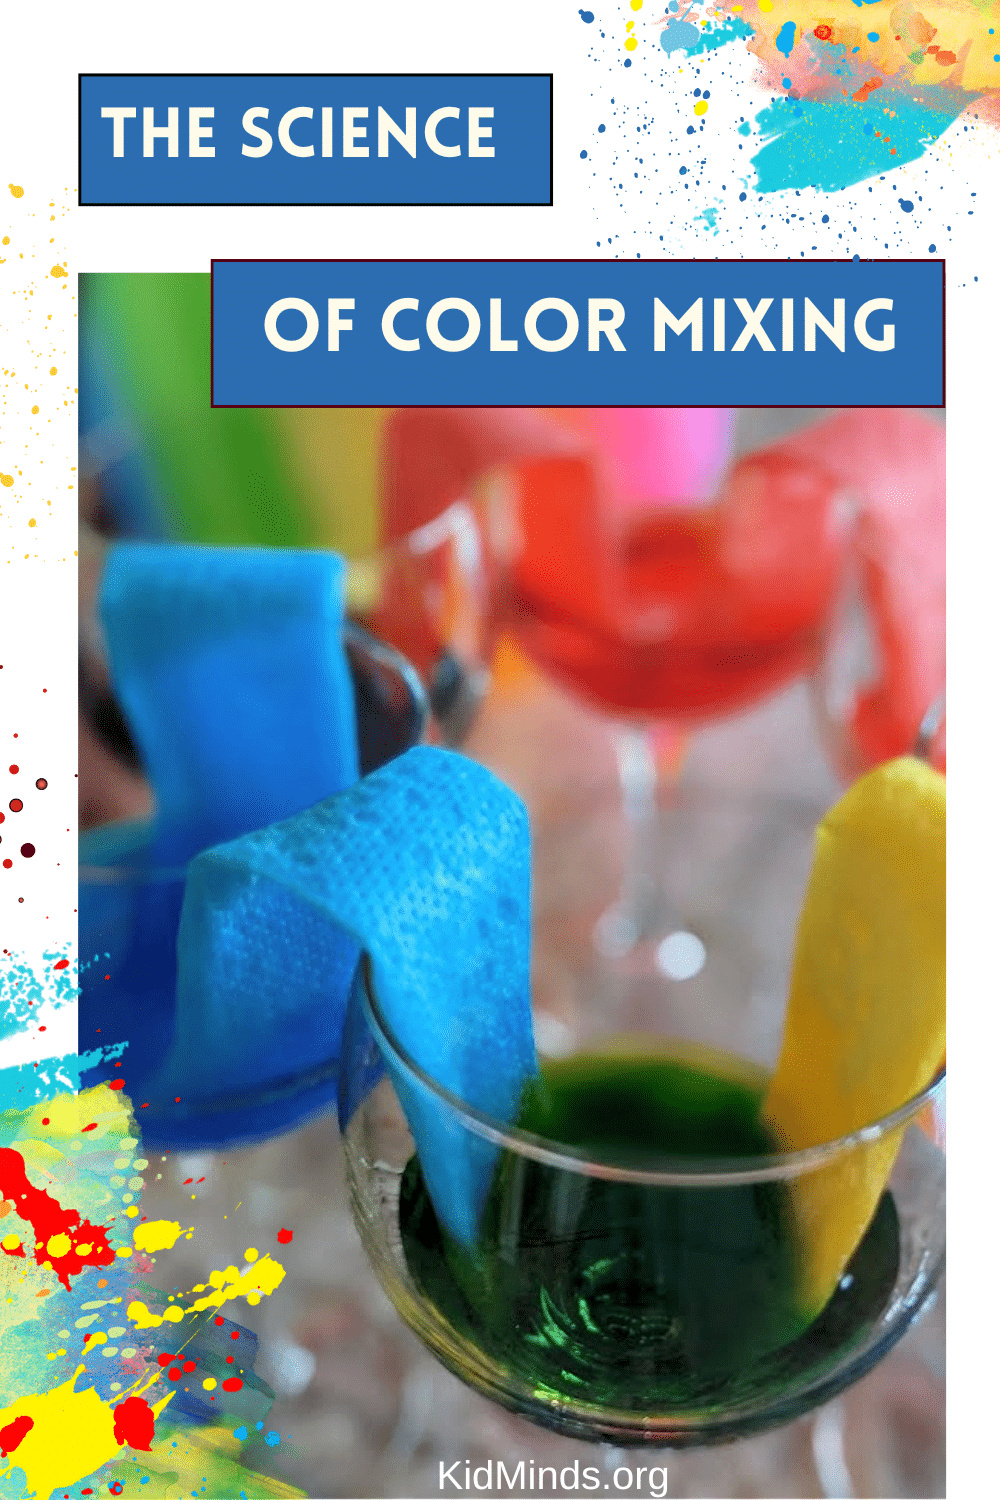 This easy and fun rainbow science activity is so pretty! Every time we do it, kids ooh and ahh in appreciation. Detailed instructions, a simple scientific explanation, and science printables are included. #kidminds #kidsactivities #handsonlearning #rainbow #science4littlekids #earlylearning #STEAM